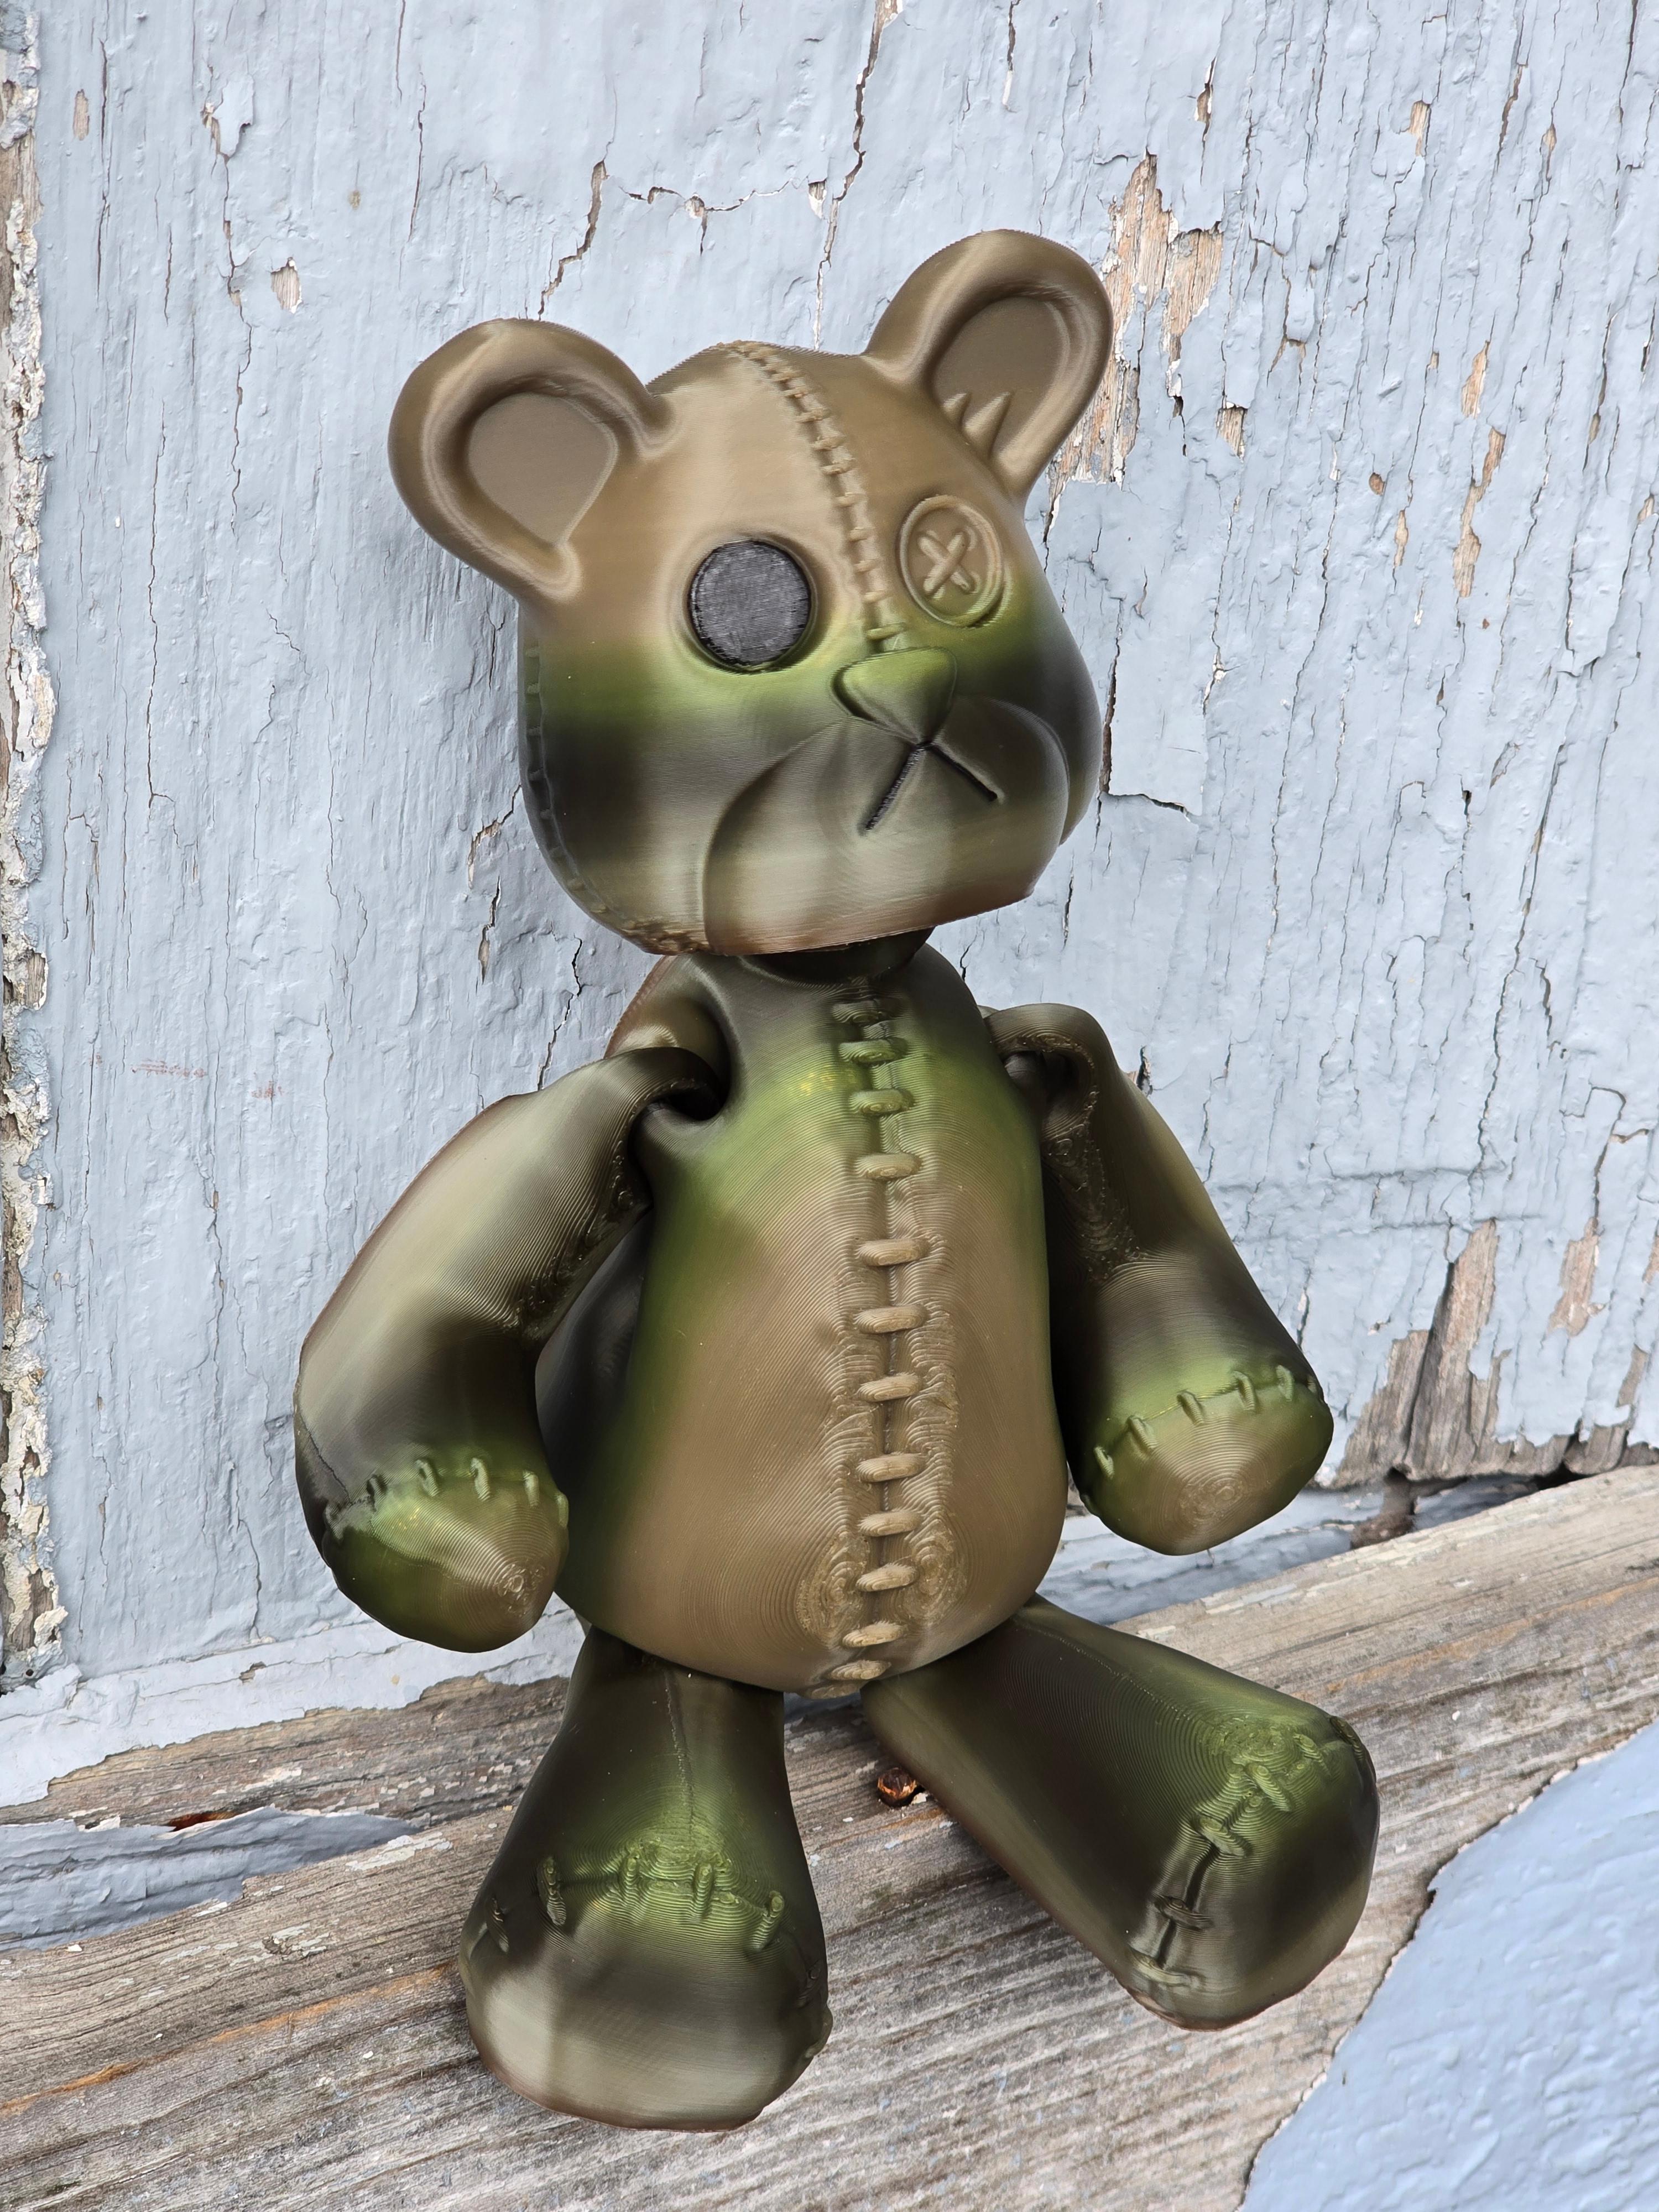 "Stitches" the Articulated Teddy Bear 3d model